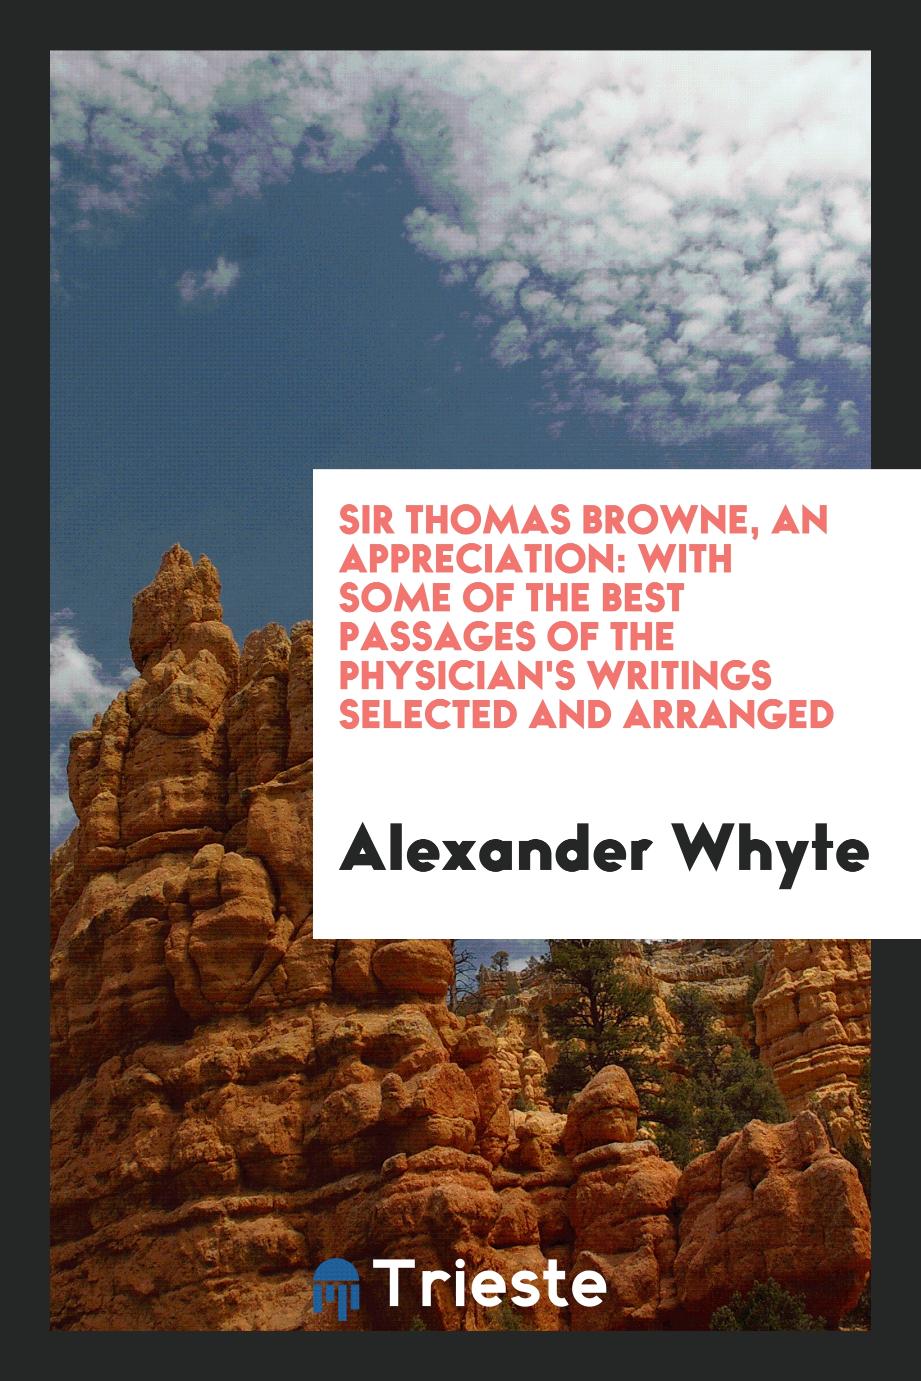 Sir Thomas Browne, an Appreciation: With Some of the Best Passages of the Physician's Writings Selected and Arranged